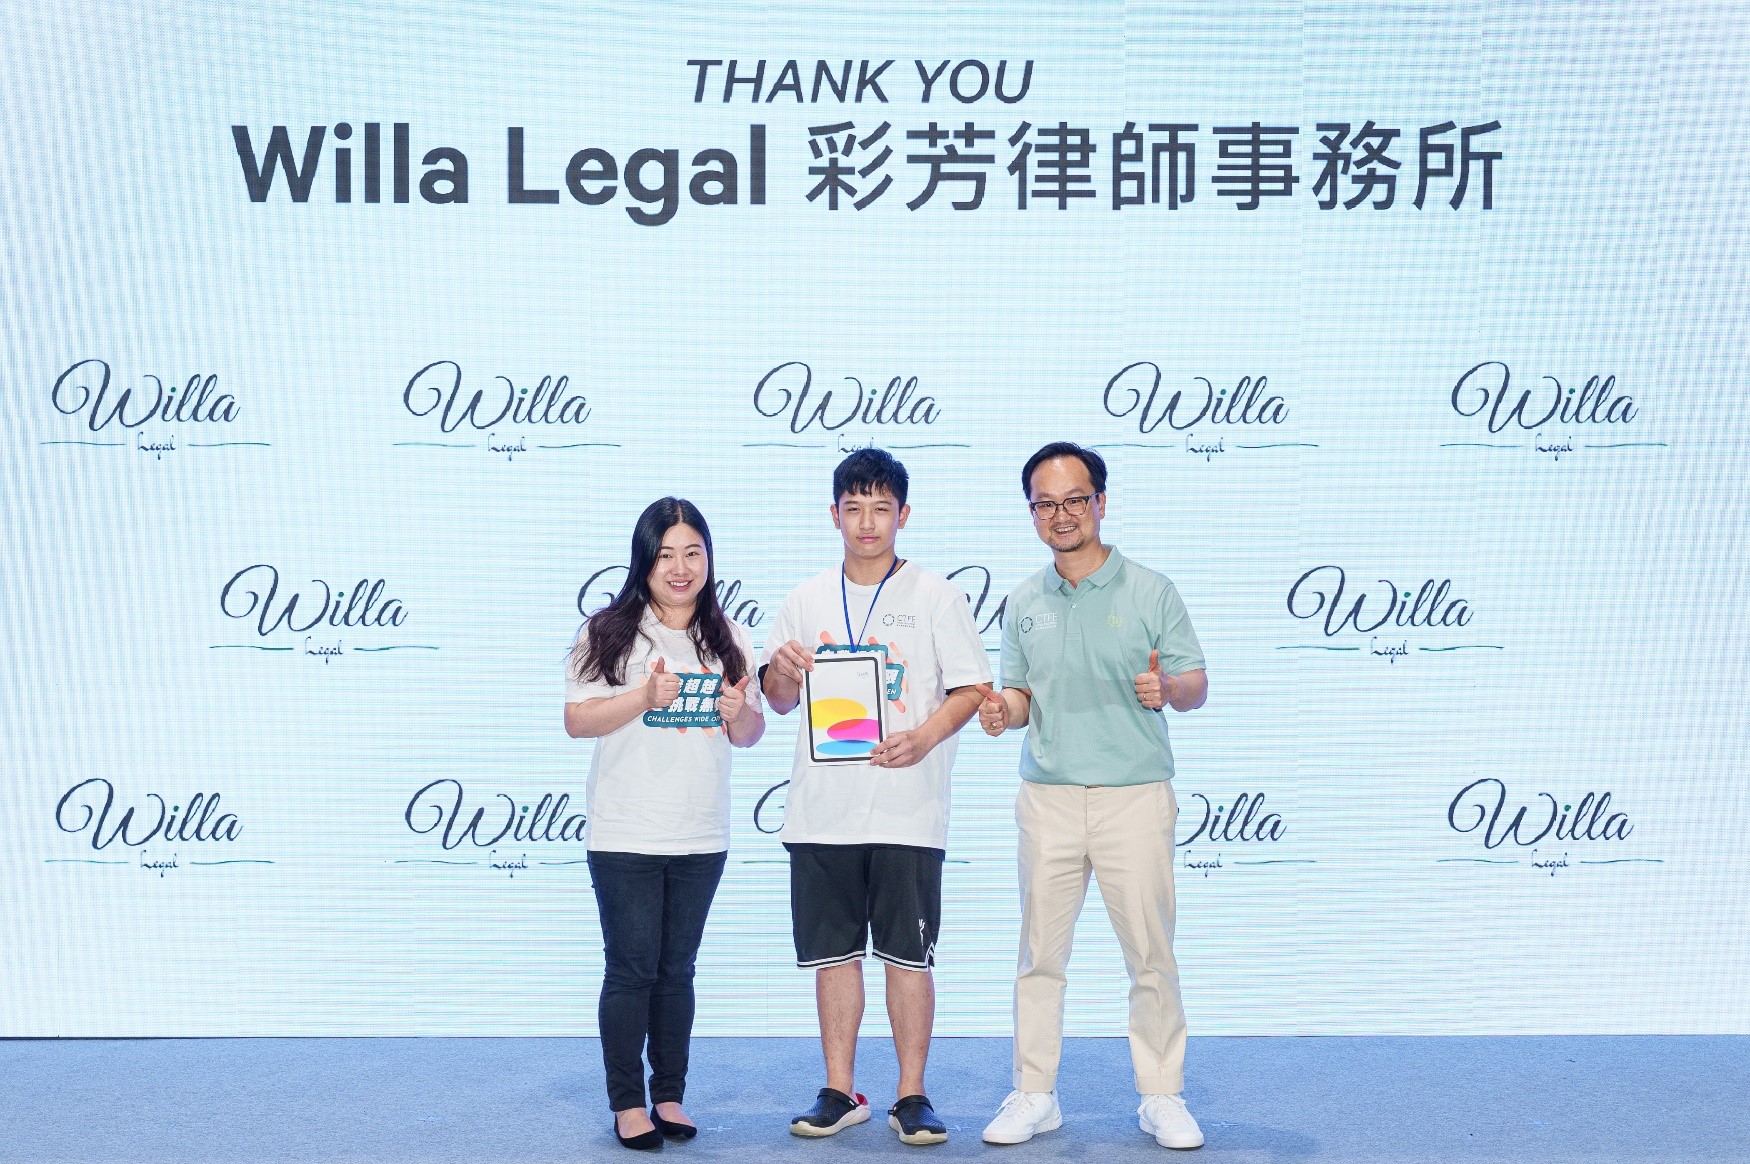 Willa Legal Supports The Strive and Rise Programme and Sponsored The Sports Carnival Organized by CTFE Social Solutions